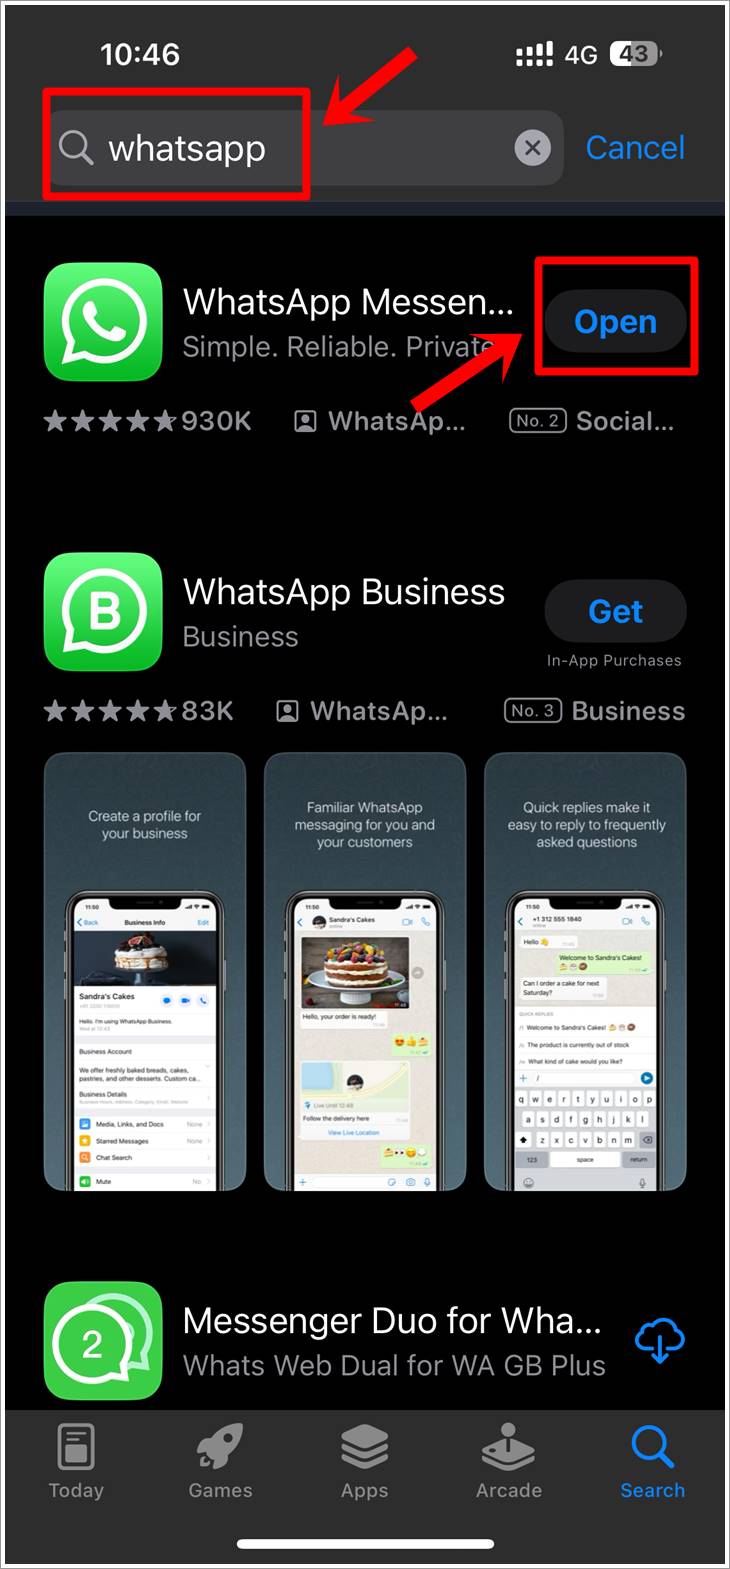 Fix WhatsApp Not Receiving Messages: This screenshot shows the 'App Store' search result for 'WhatsApp' on an iPhone. The keyword 'WhatsApp' is highlighted in the search bar, and the 'Update' button next to the WhatsApp app is also highlighted.